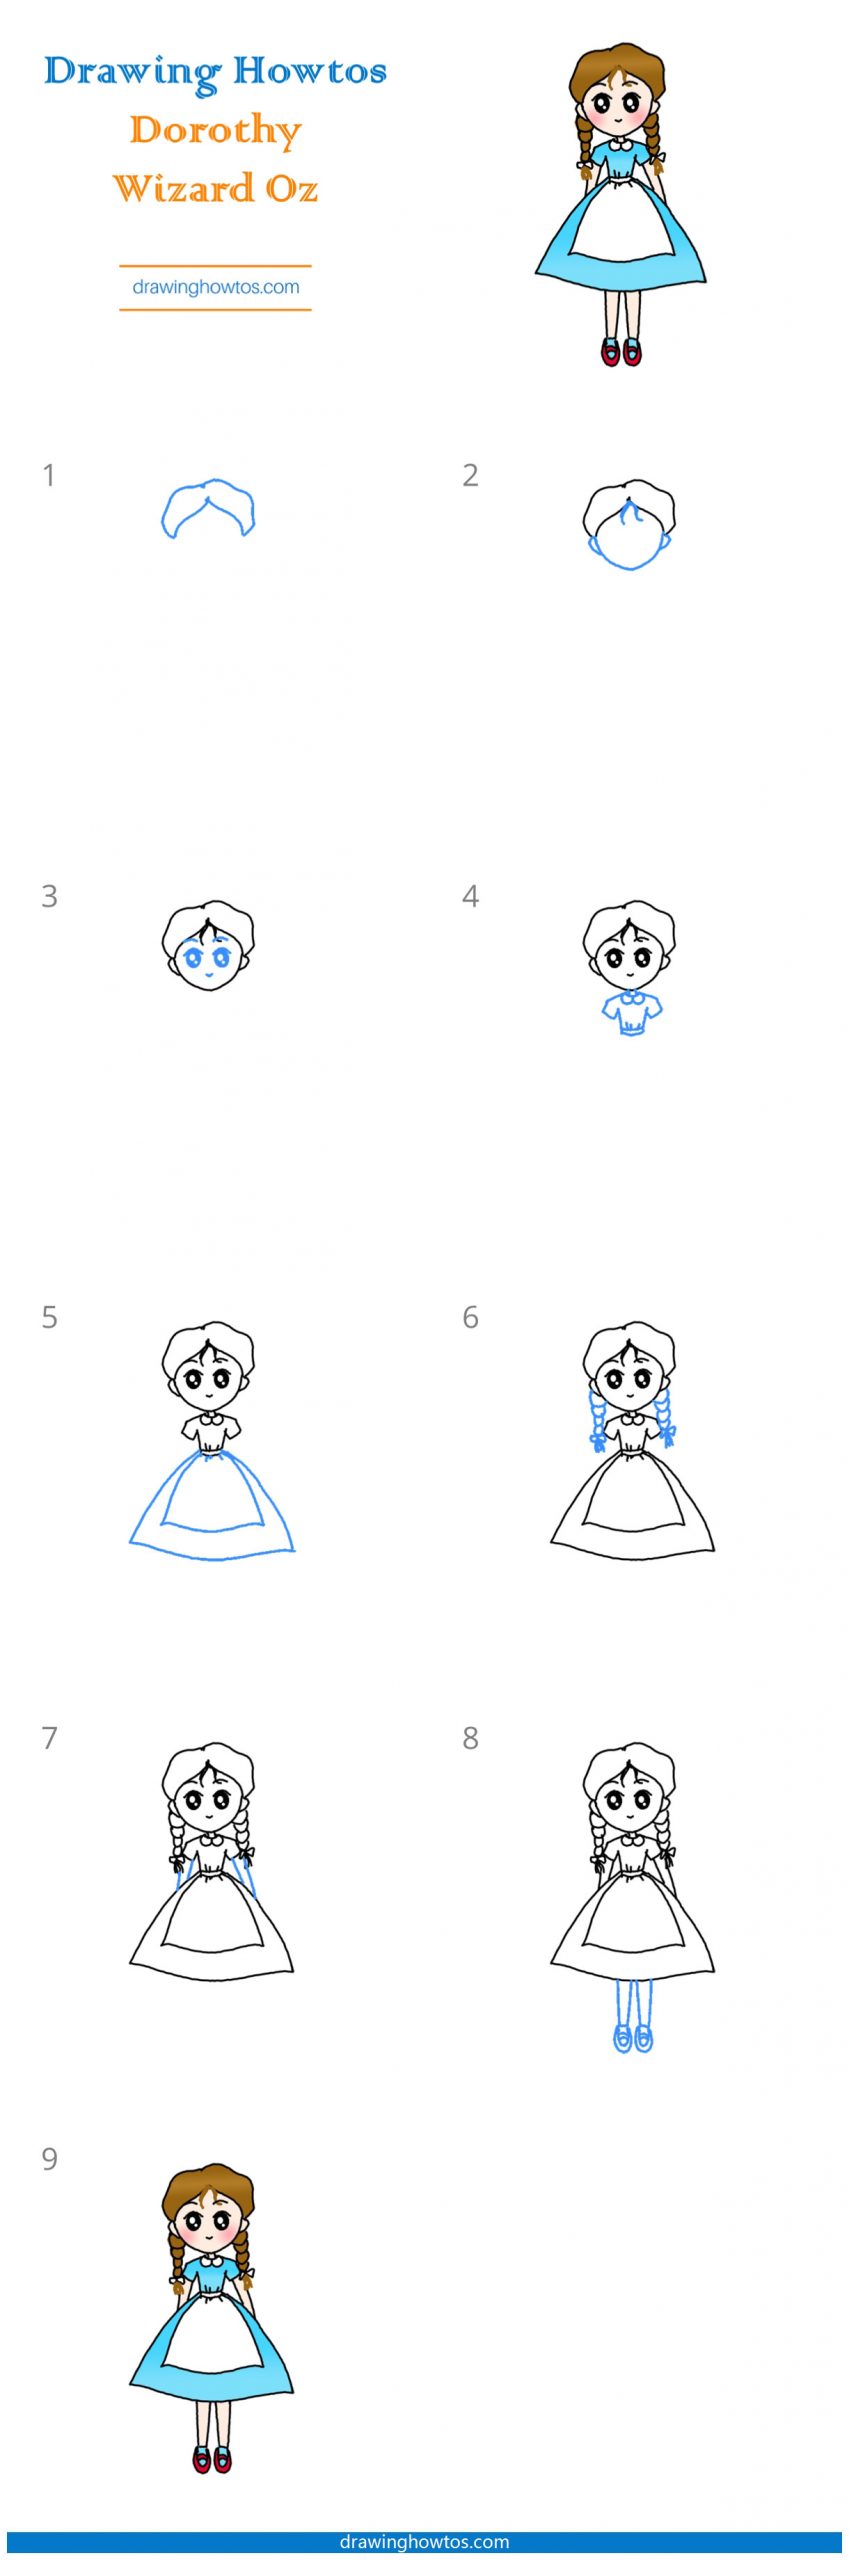 How to Draw Dorothy from Wizard of OZ Step by Step